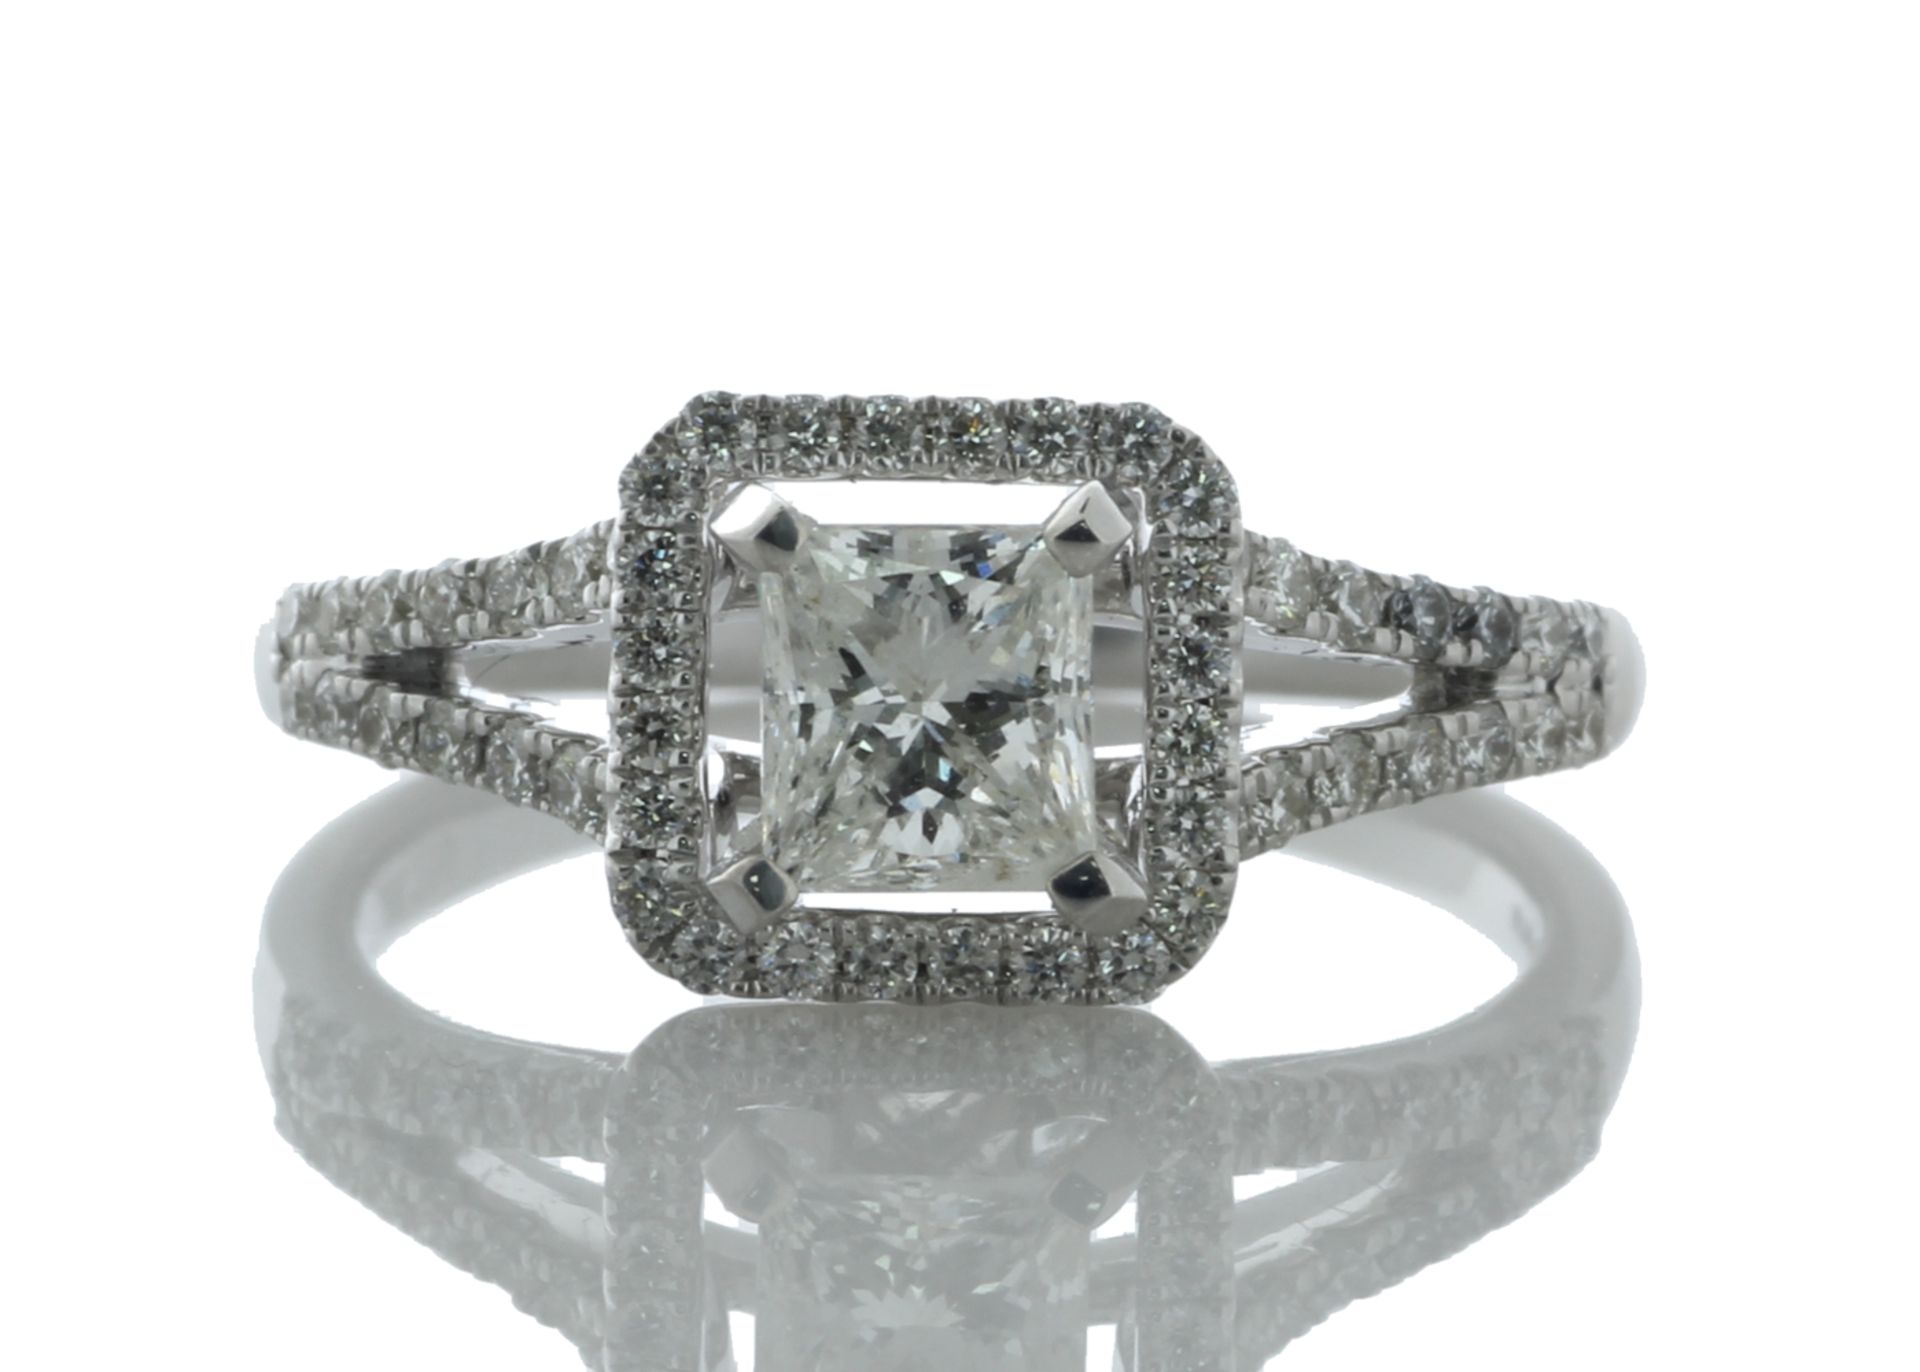 18ct White Gold Single Stone Princess Cut Diamond Ring (0.72) 1.05 Carats - Valued by GIE £15,497.00